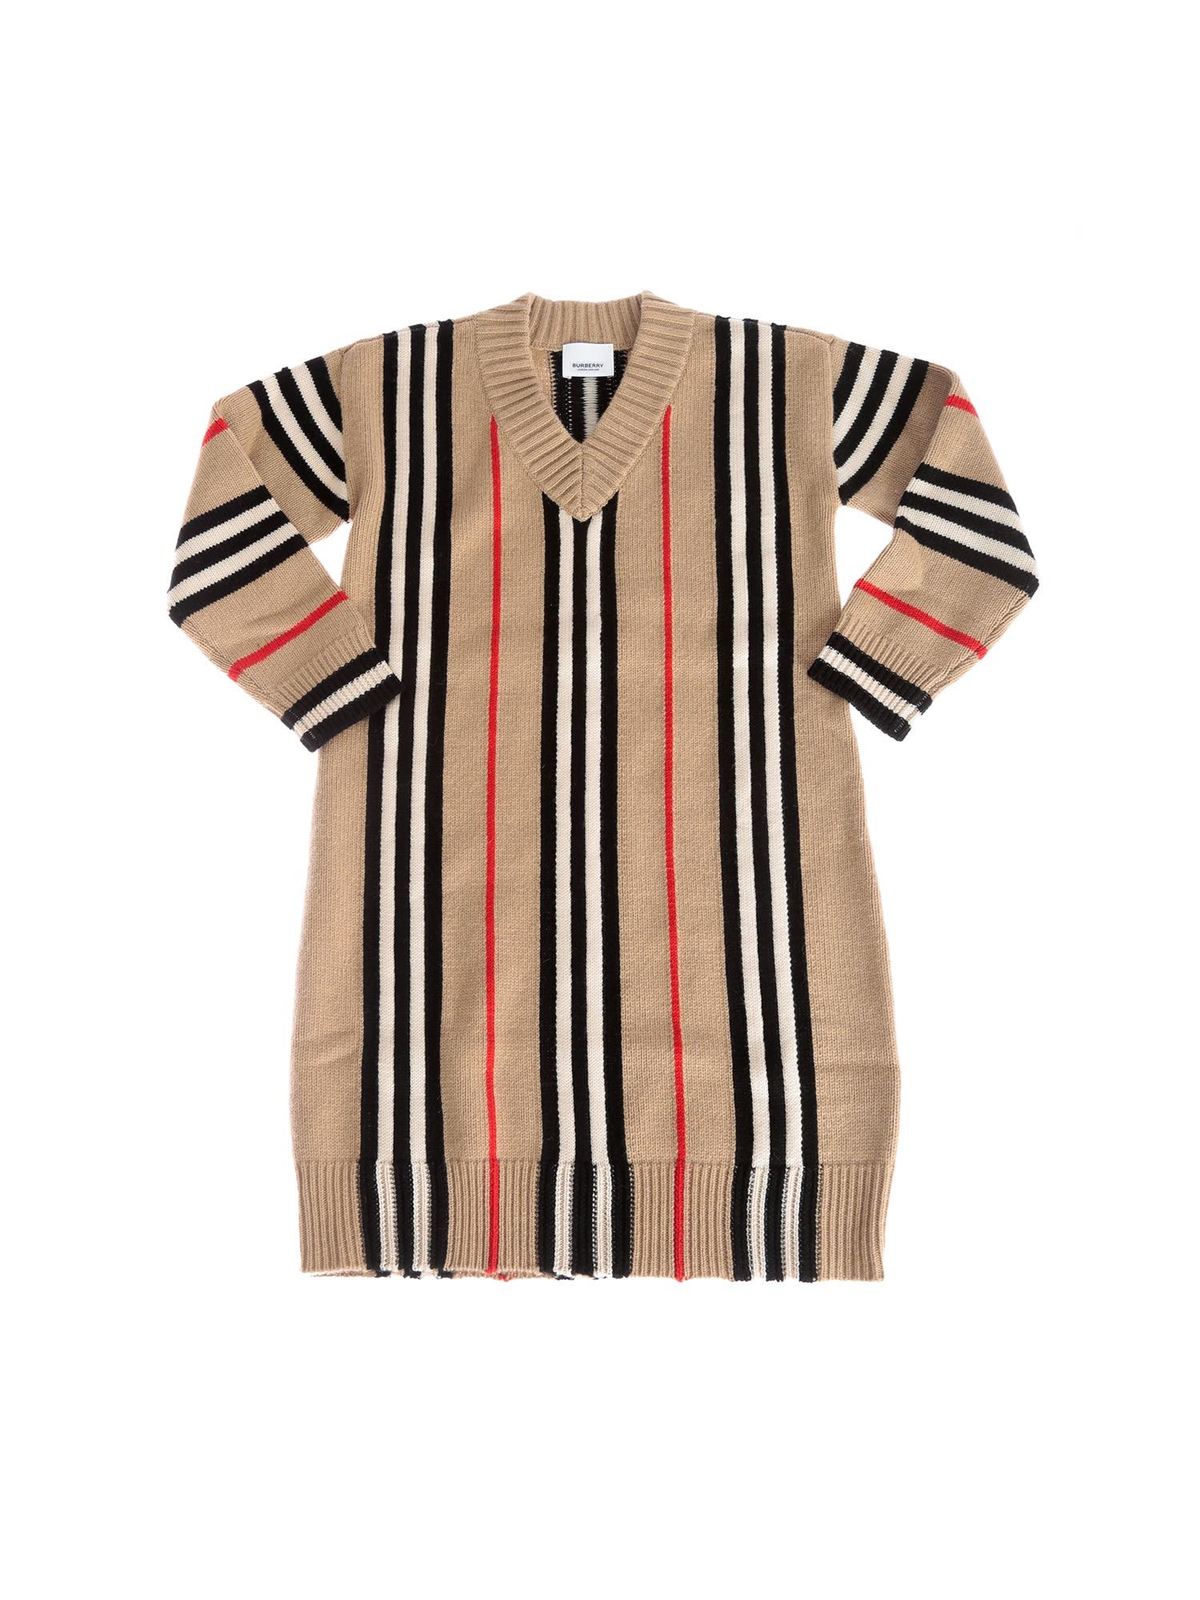 BURBERRY BIANCA DRESS WITH STRIPED PATTERN